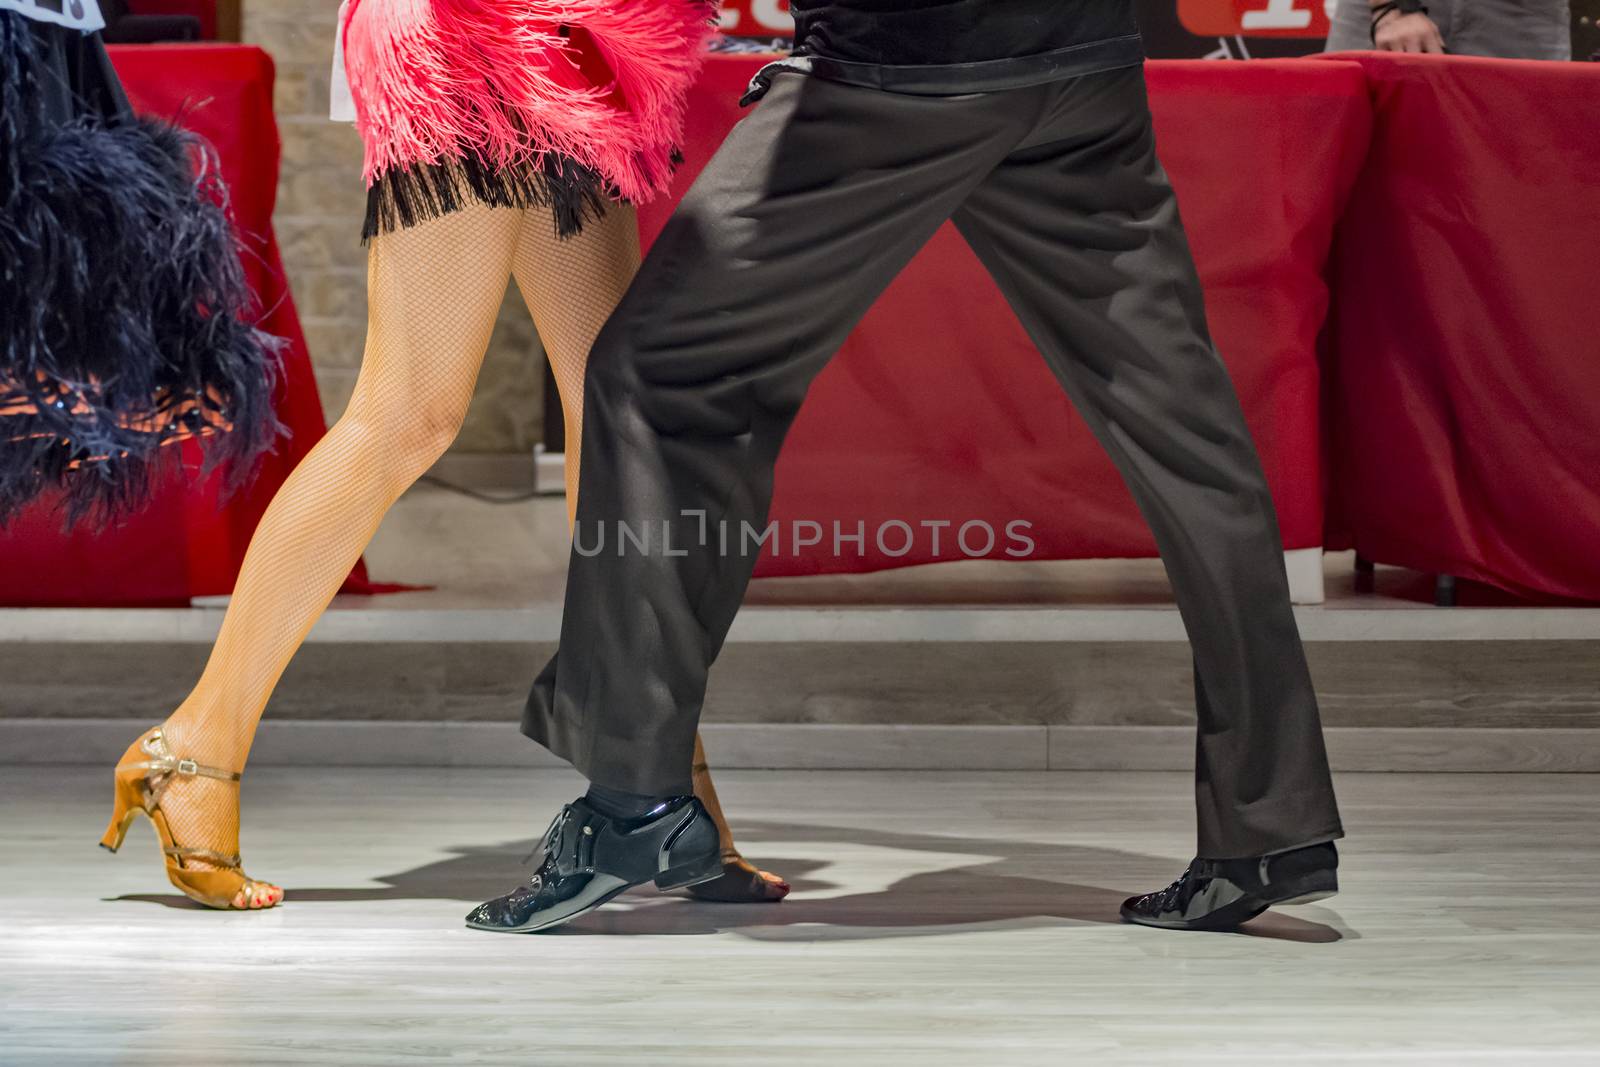 legs of a couple who dance in competition